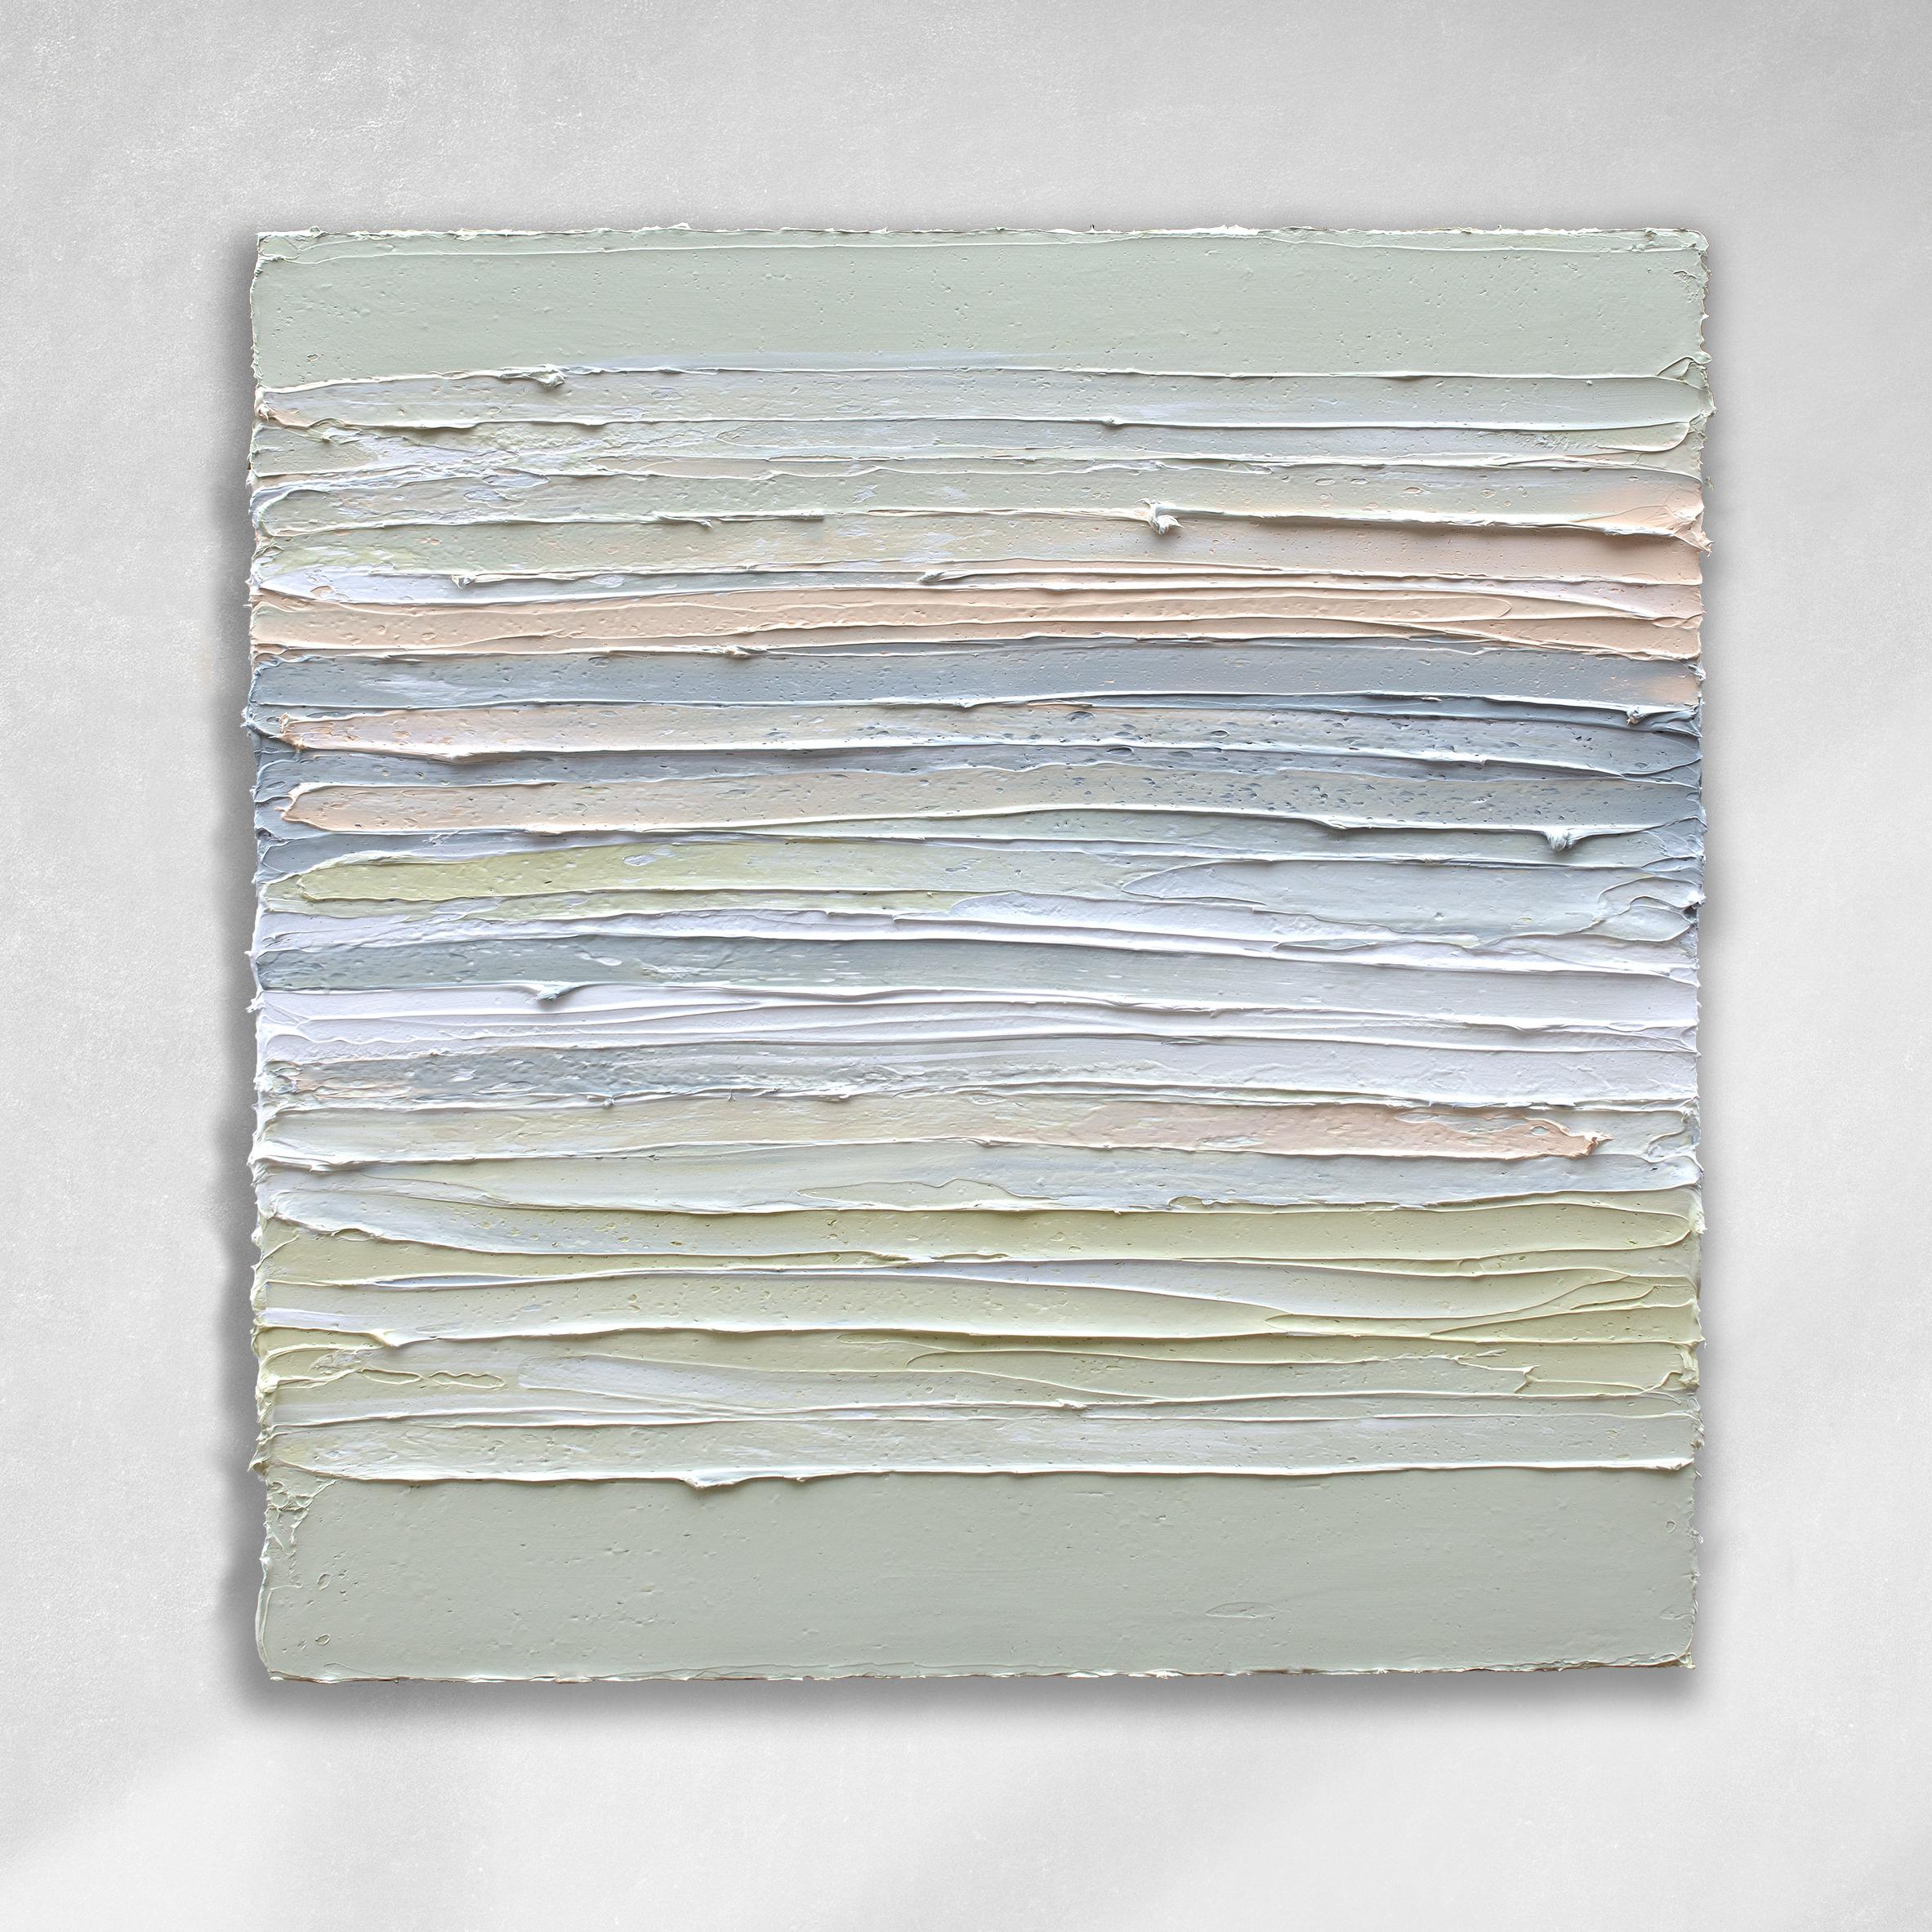 This abstract painting by Teodora Guererra features a light palette with light, muted green at the top and bottom, and other accent colors toward the center of the composition including white, grey, and light orange and yellow. The artist applies